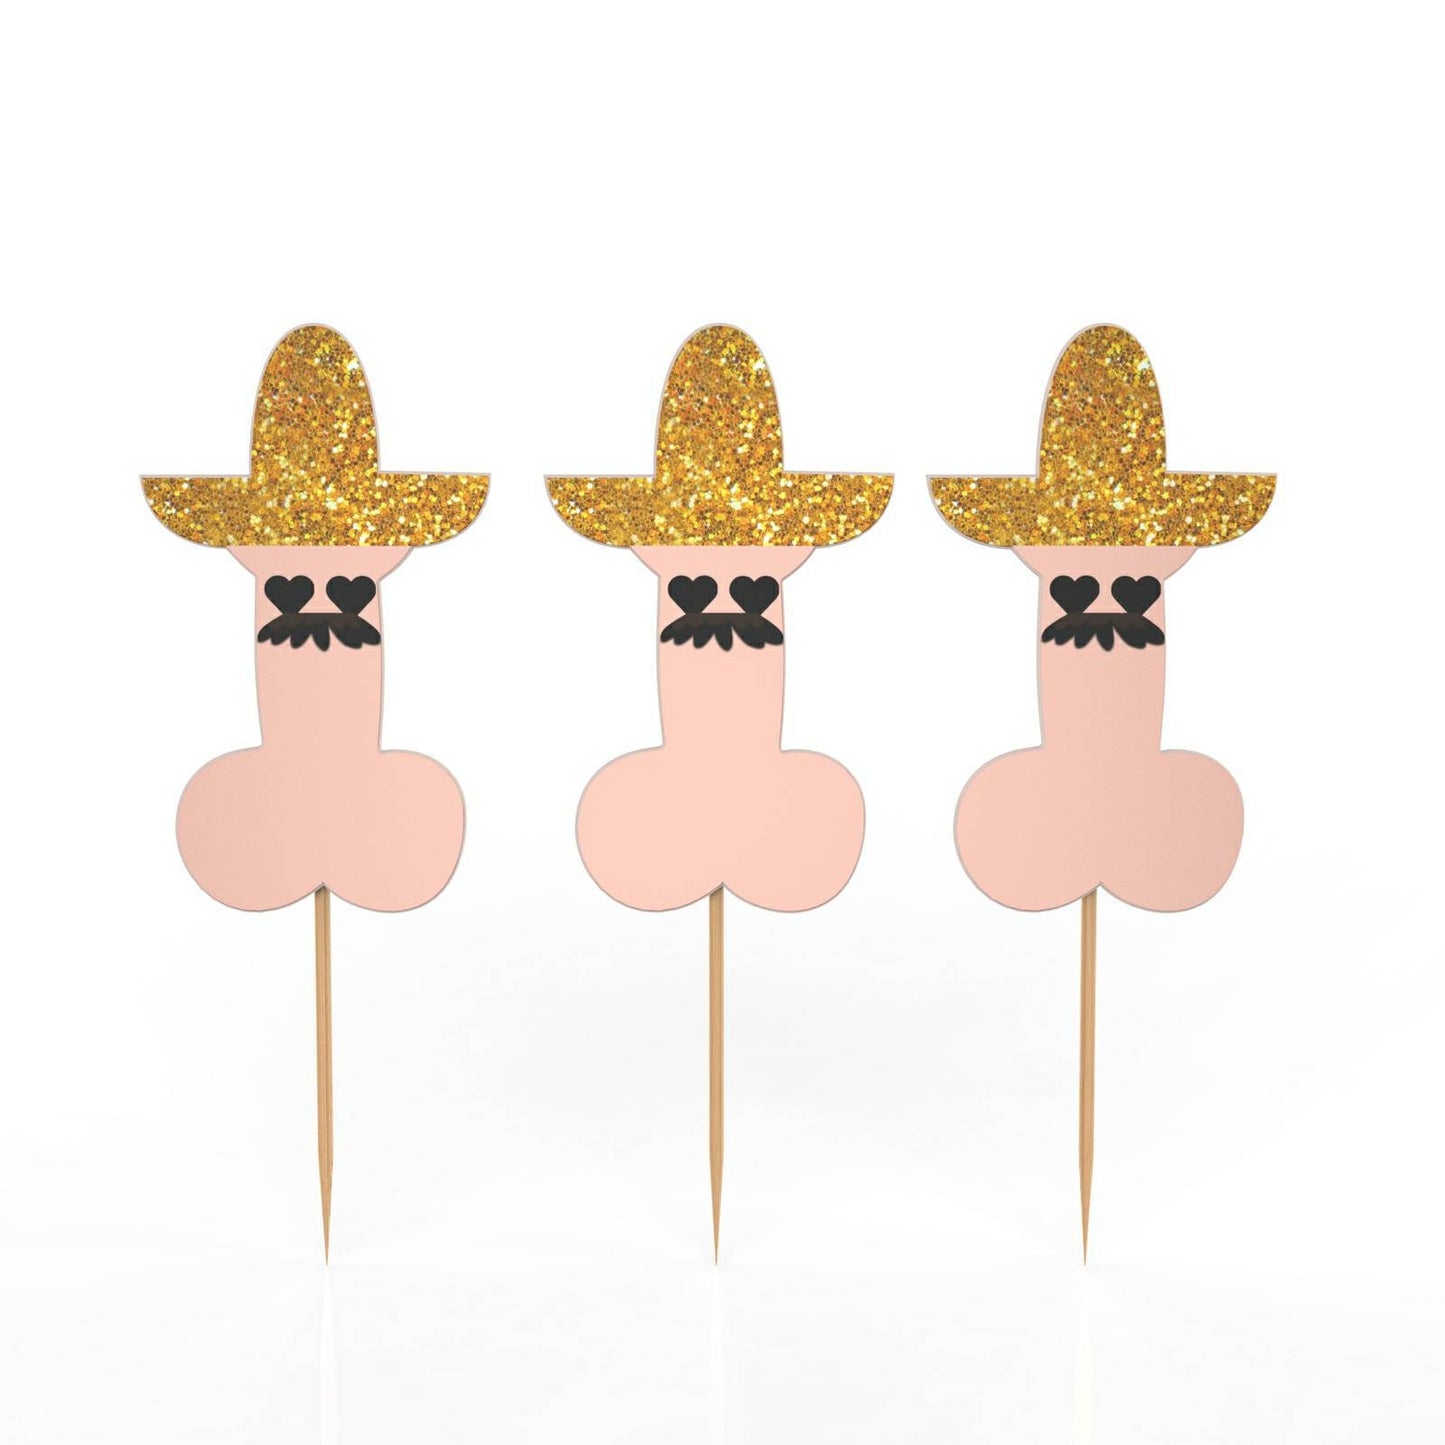 36 Cupcake Toppers Penis Bachelorette Party Decorations funny Hat Man Willy Bridal Shower Supplies